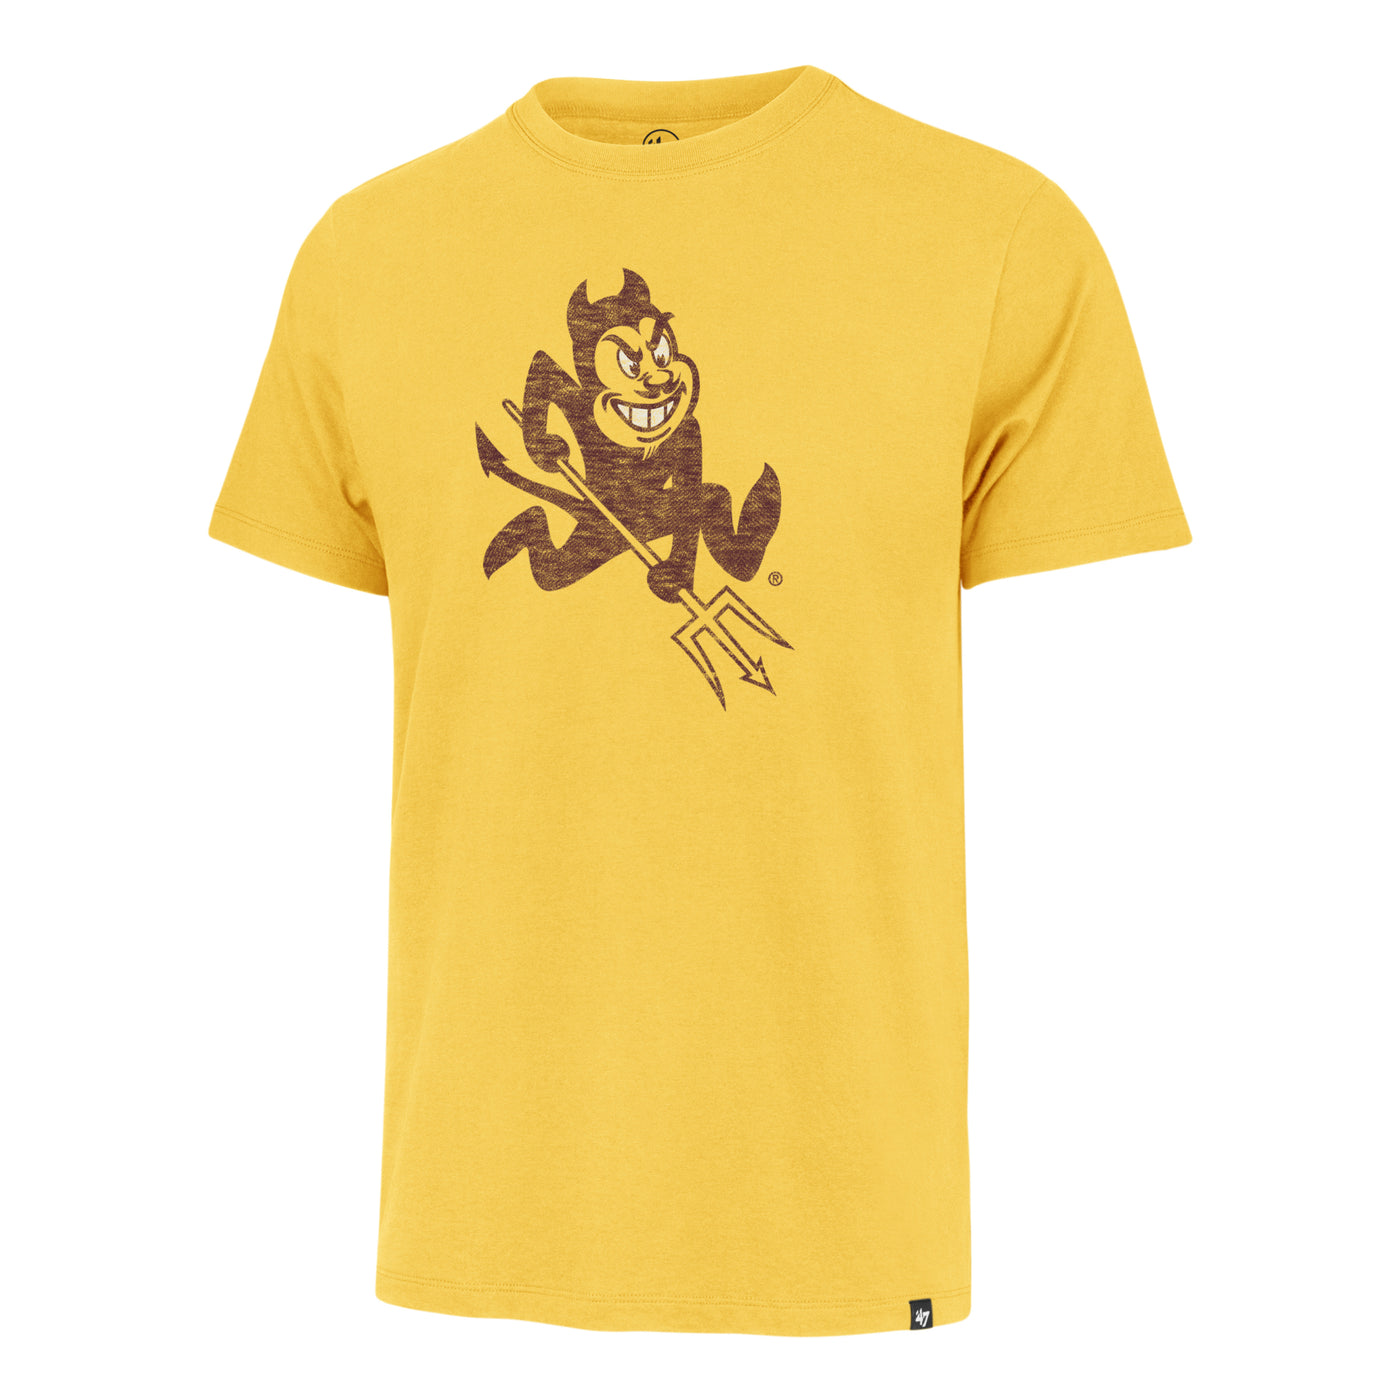 ASU Gold shirt with faded sparky logo on the chest. 